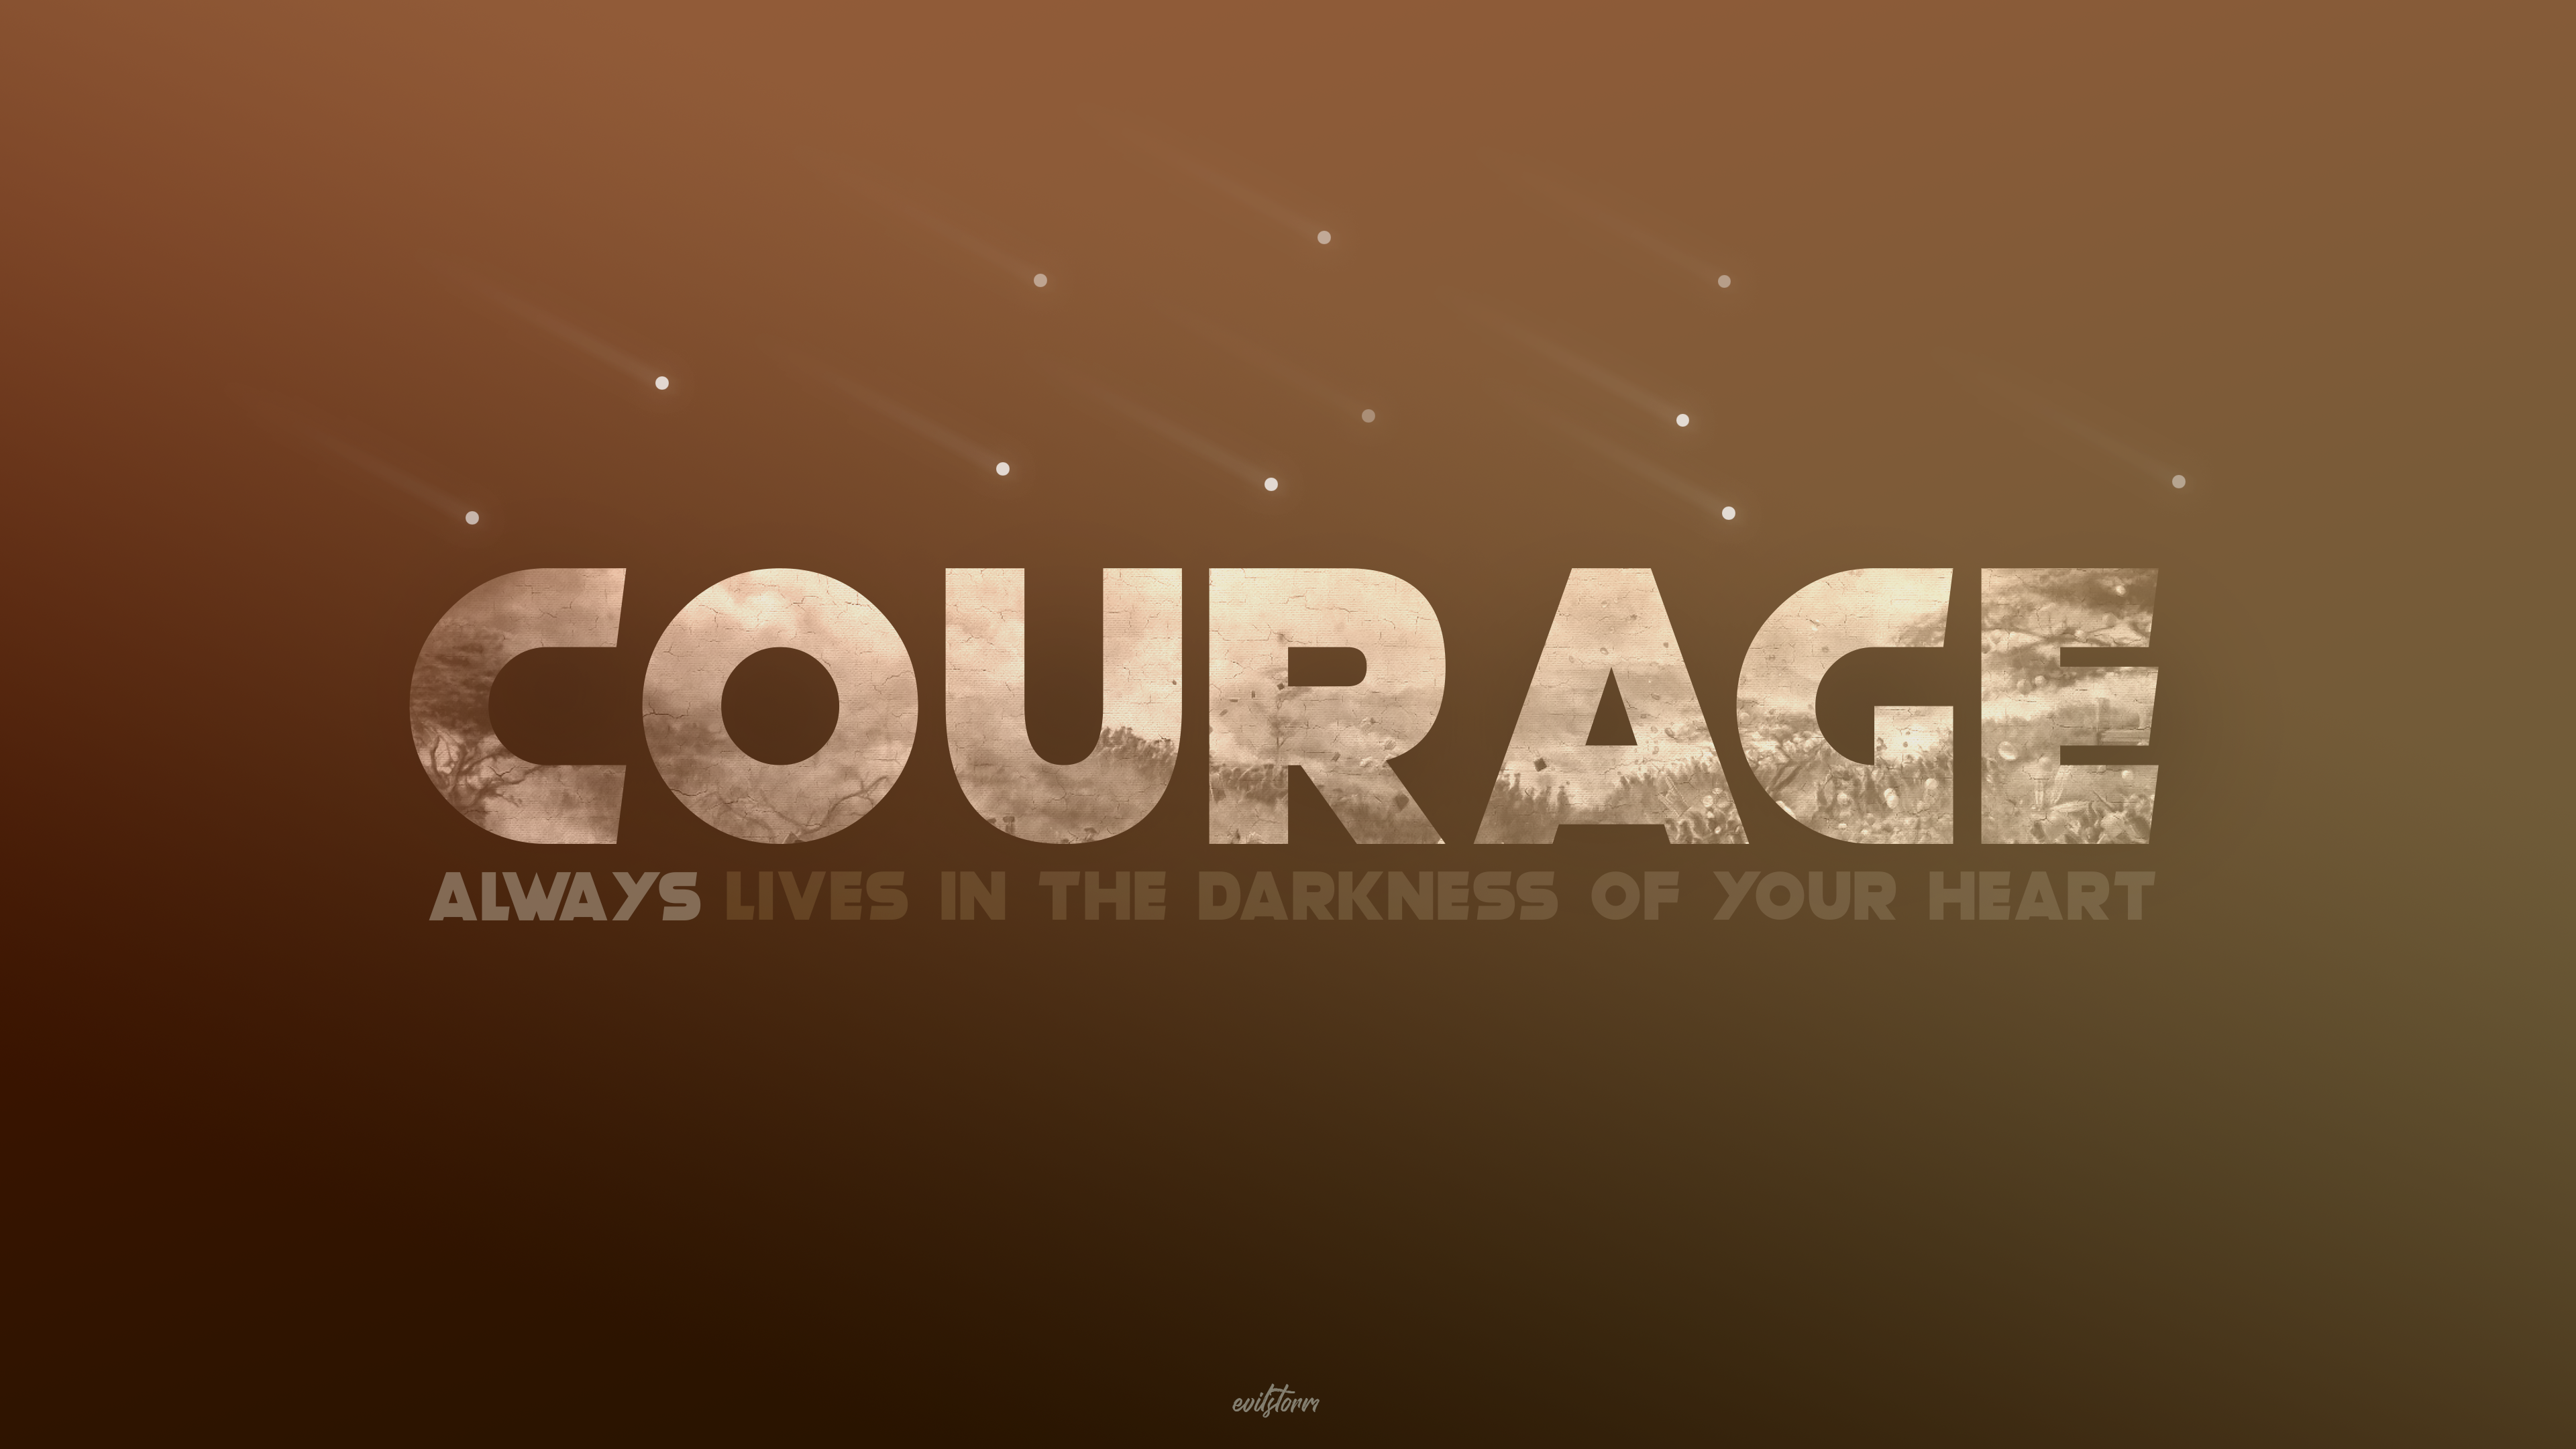 Wonderful Bible Verses about Courage